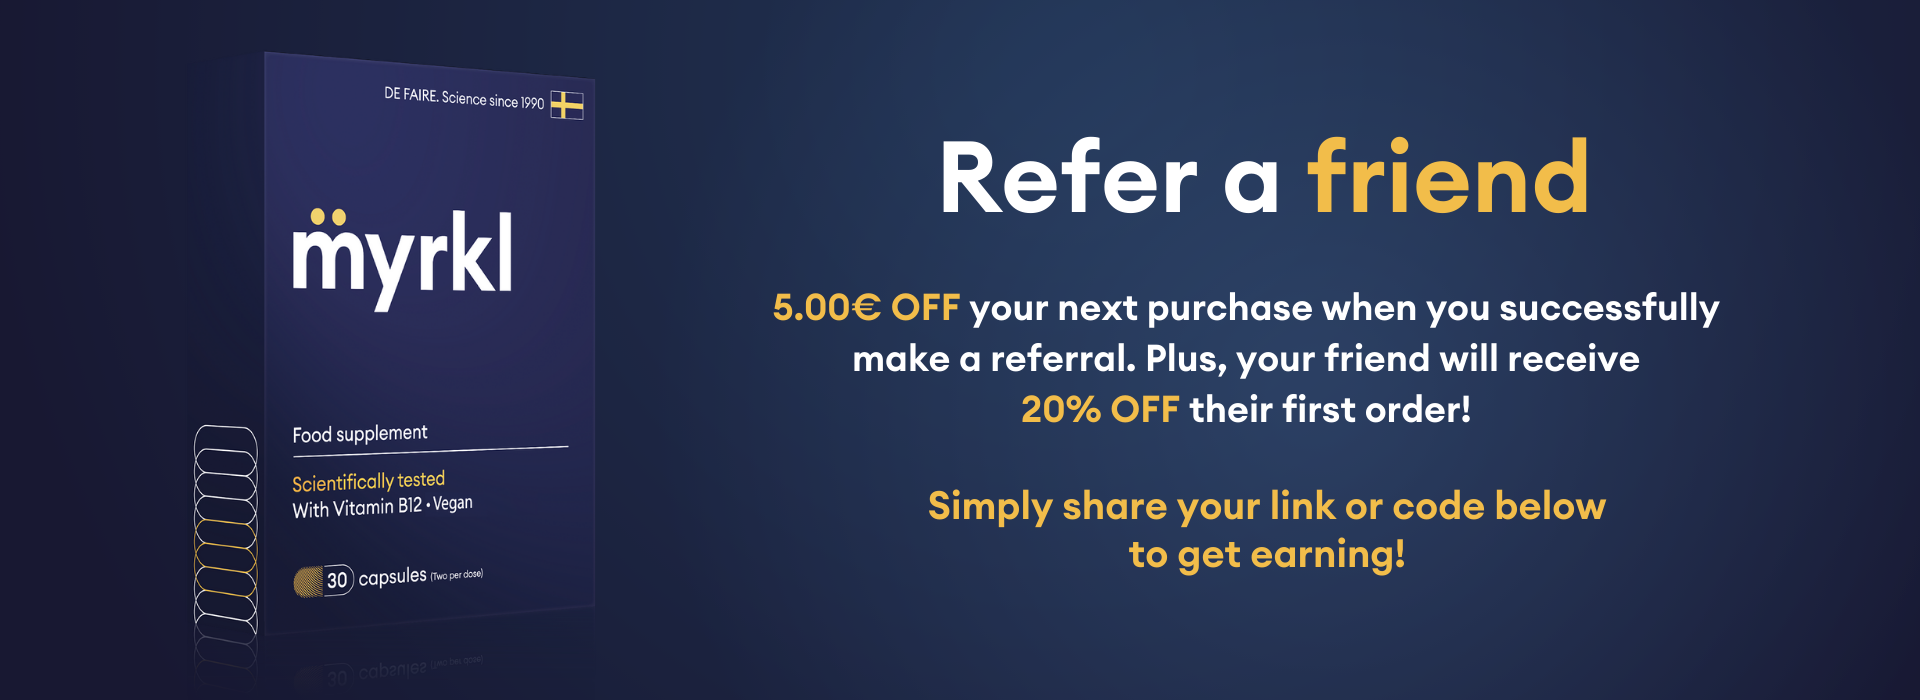 refer a friend. 5 euros off your next purchase when you successfully make a referral. Plus, your friend will receive 20% off their first order! simply share your link or code below to get earning.